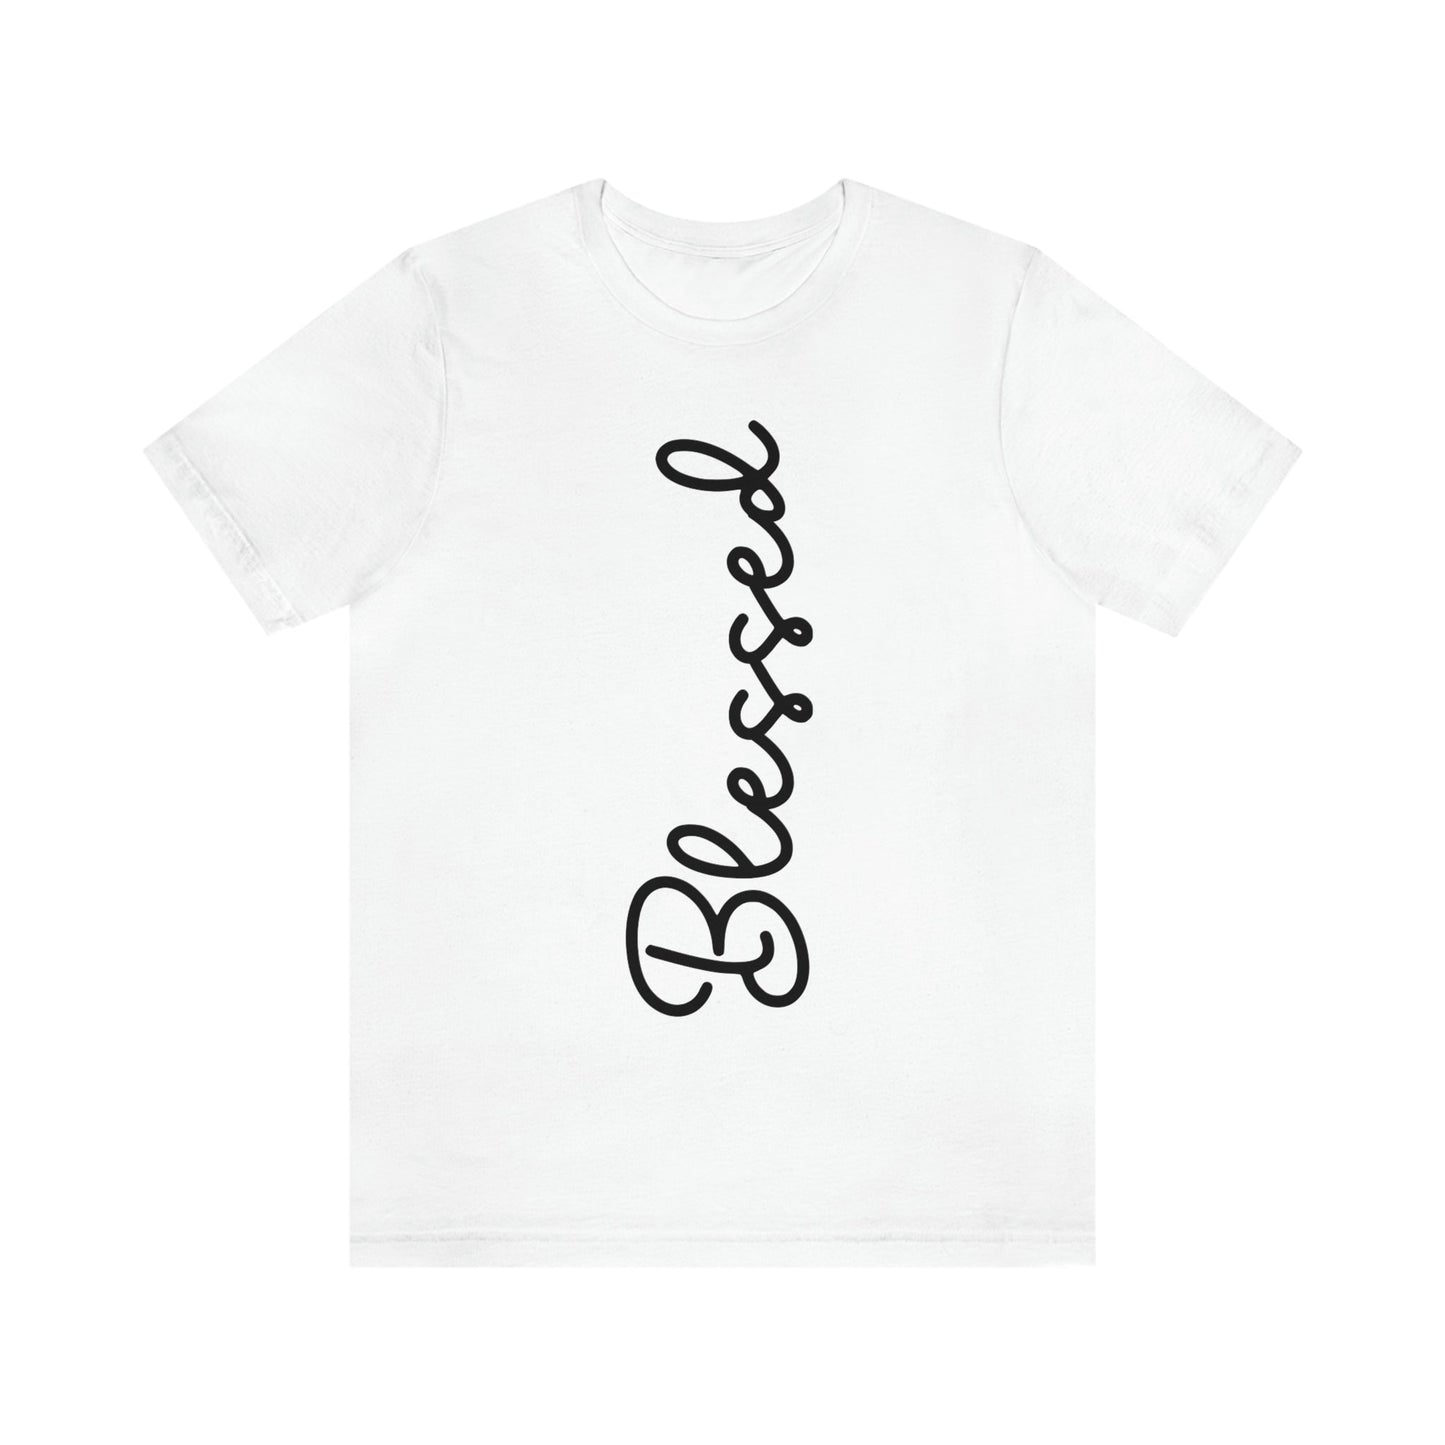 Blessed (Graphic Black Text) Unisex Jersey Short Sleeve Tee - Style: Bella+Canvas 3001